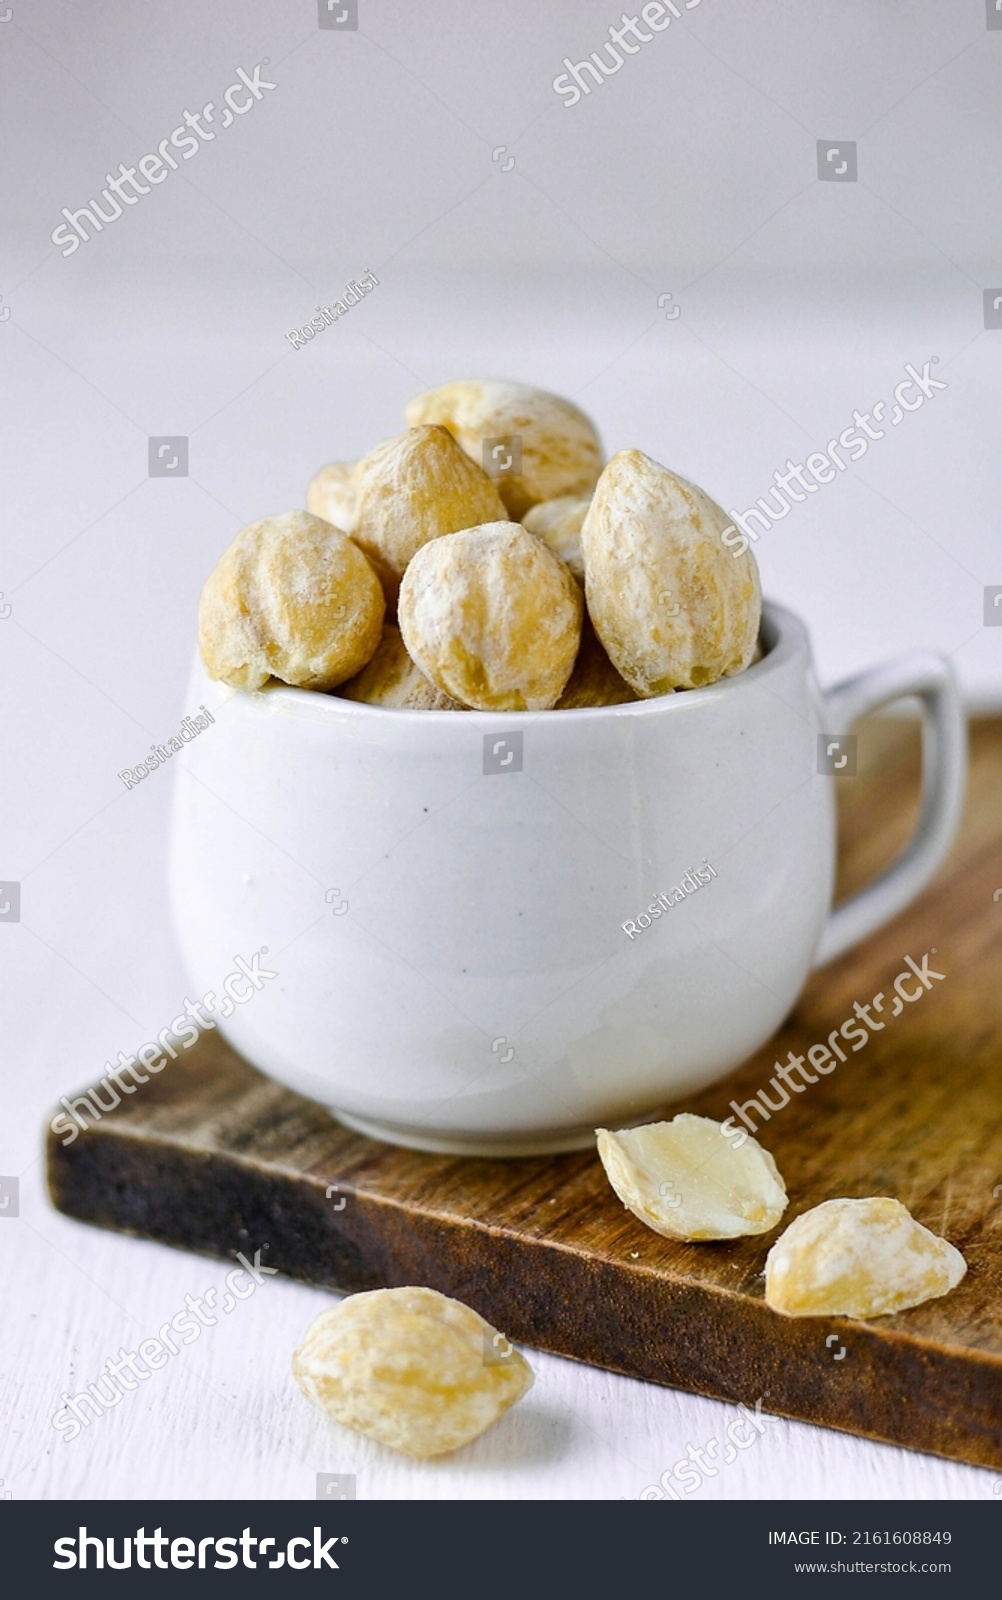 Stock Photo Candlenut Aleurites Moluccana Or Known As Kemiri In Indonesia Is A Spice That Used For Cooking 2161608849 